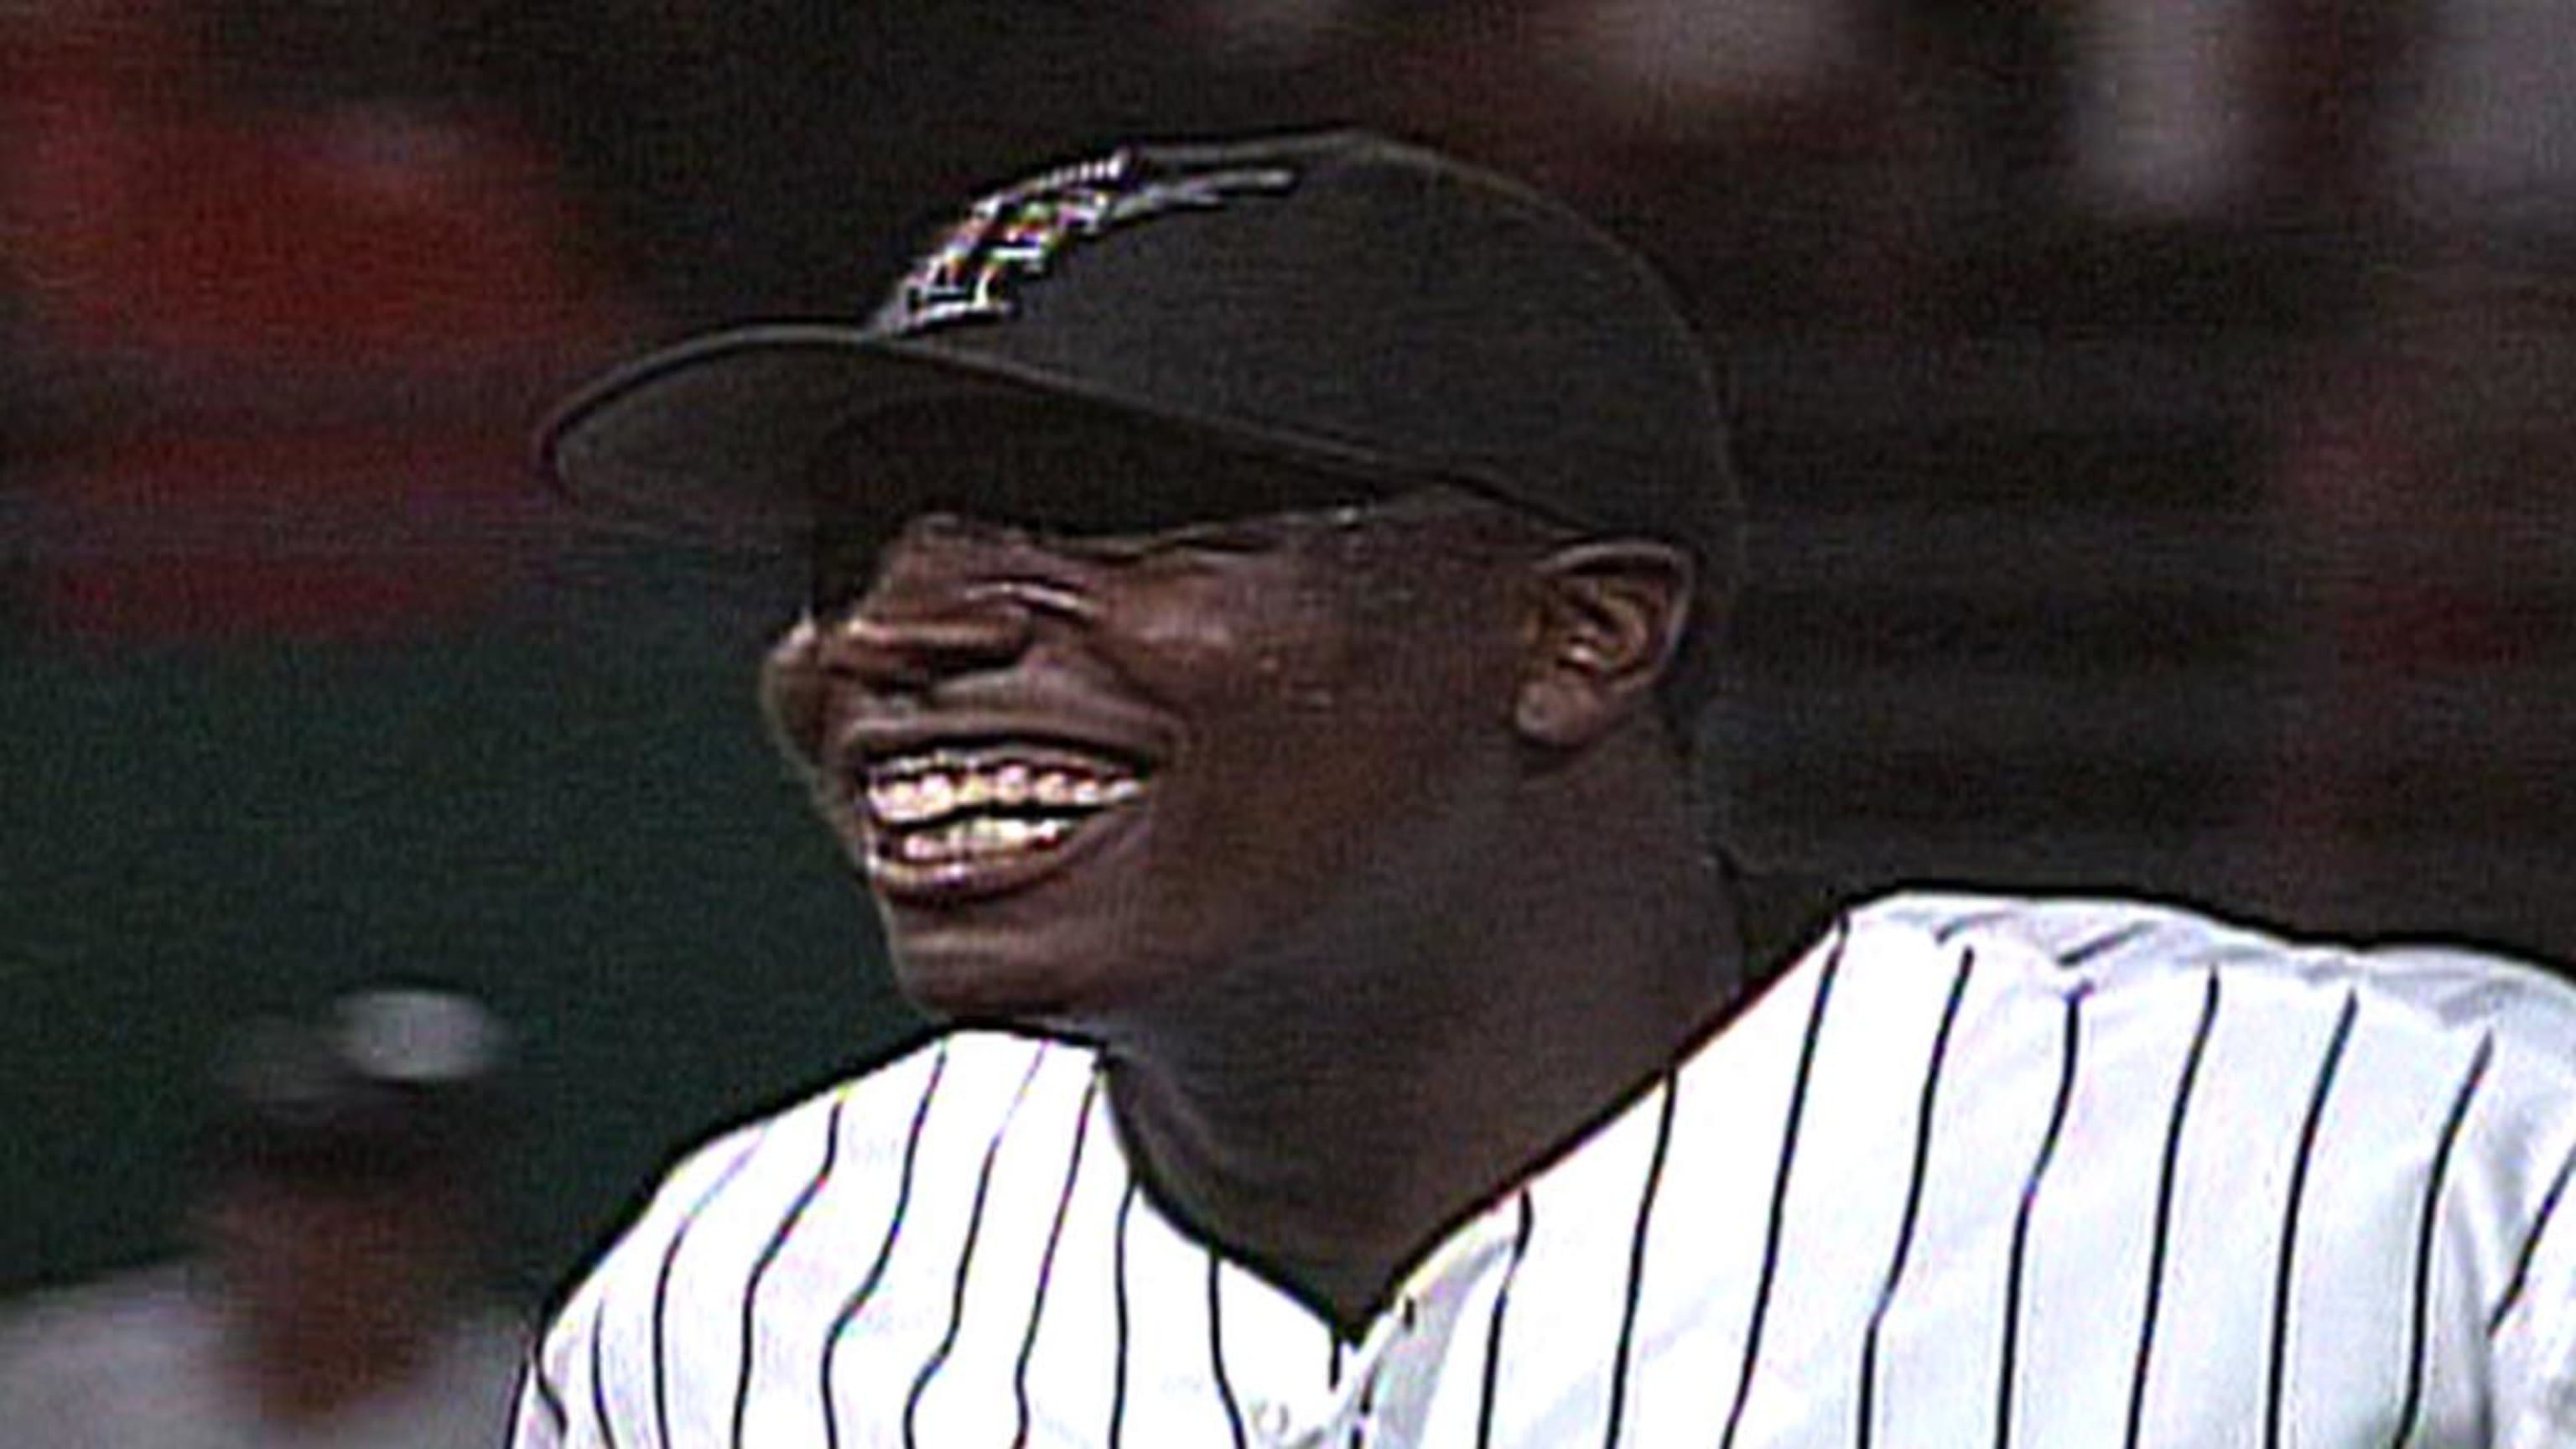 Dontrelle Willis smile lives on long after he retired